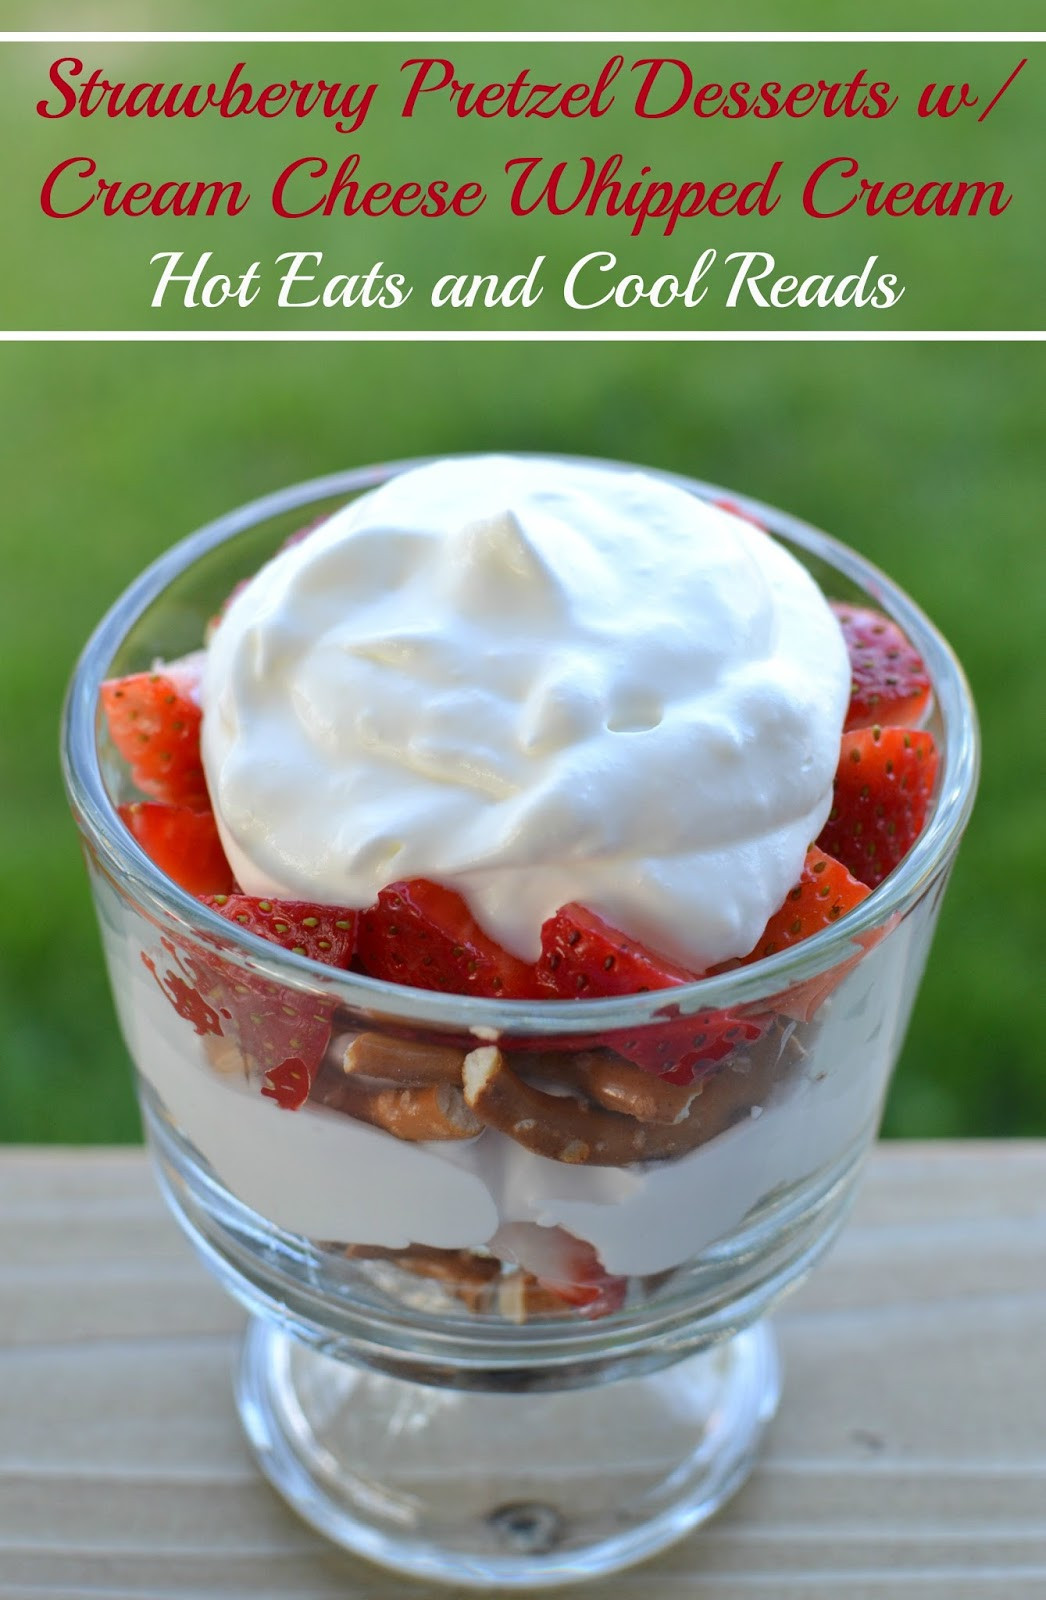 Whipped Cream Desserts
 Hot Eats and Cool Reads Individual Strawberry Pretzel